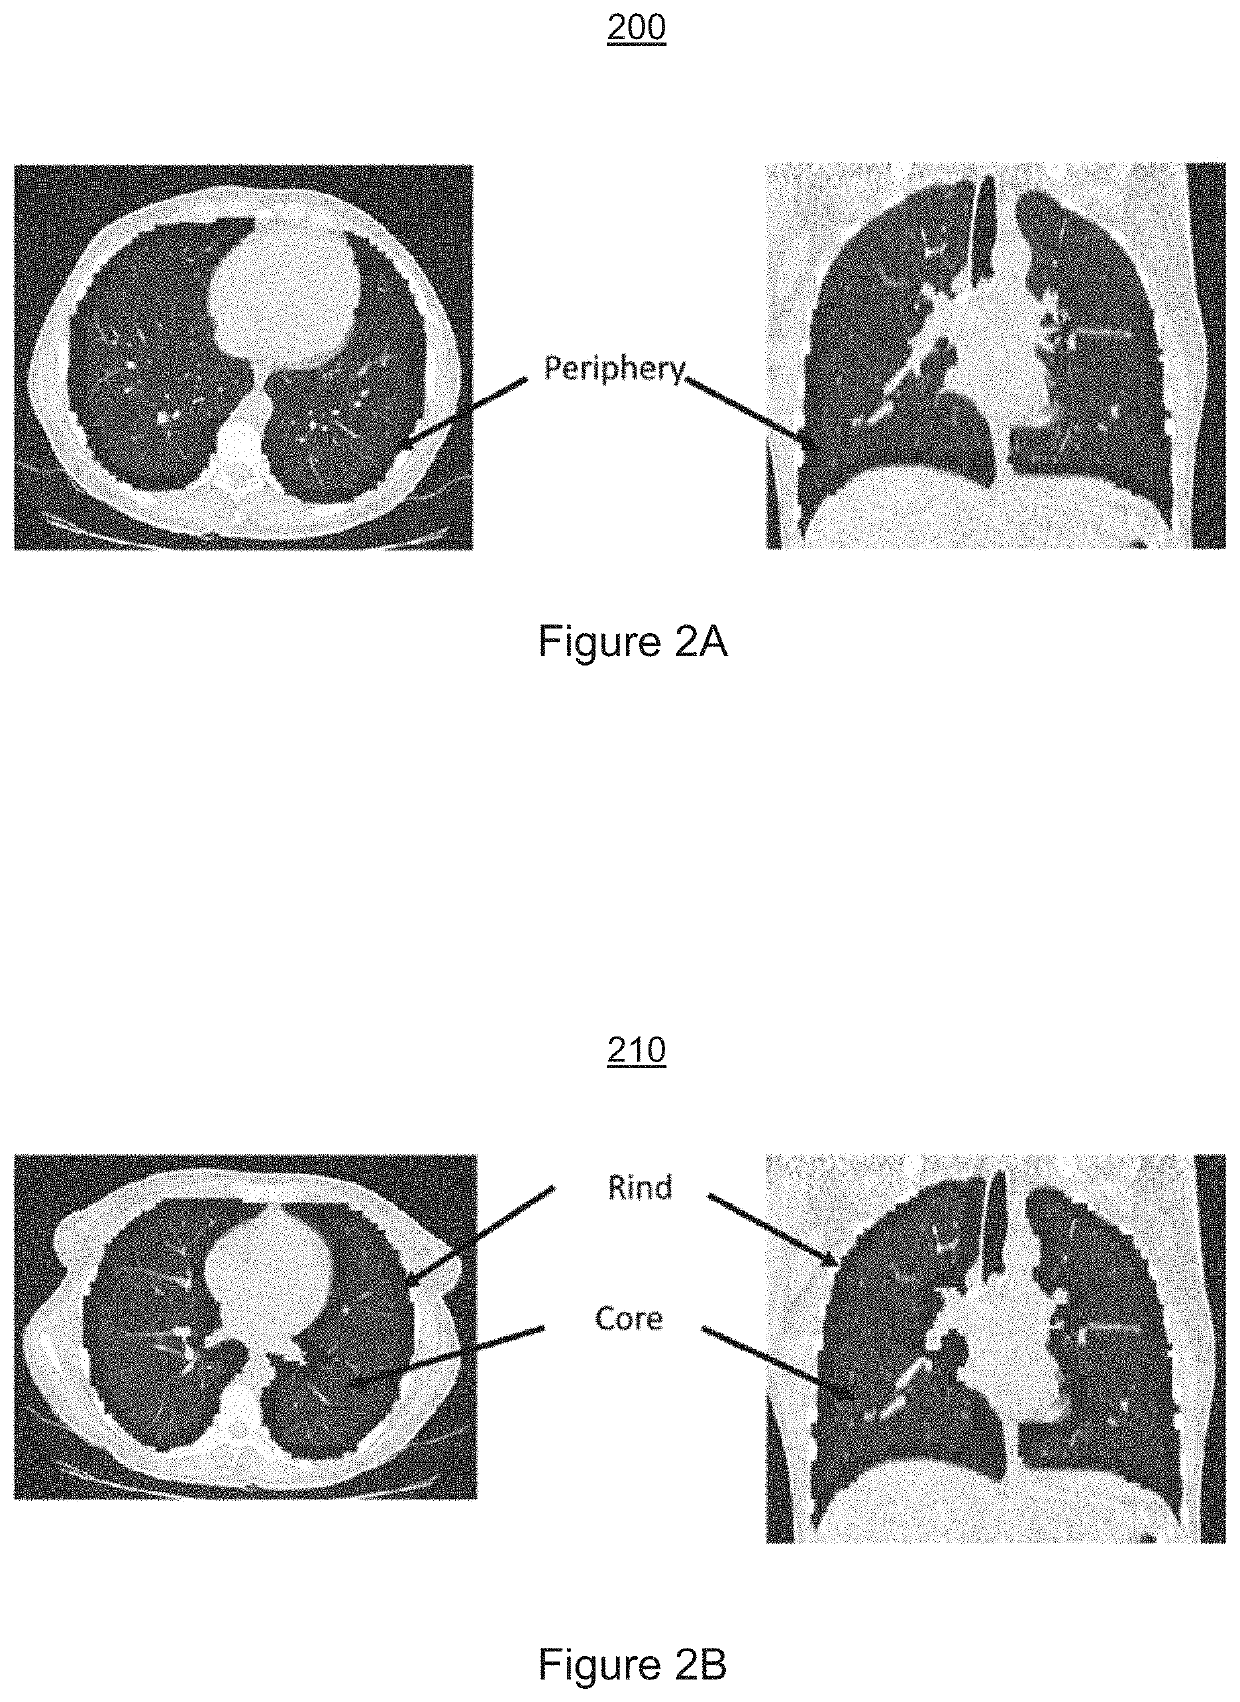 Automatic detection of covid-19 in chest ct images